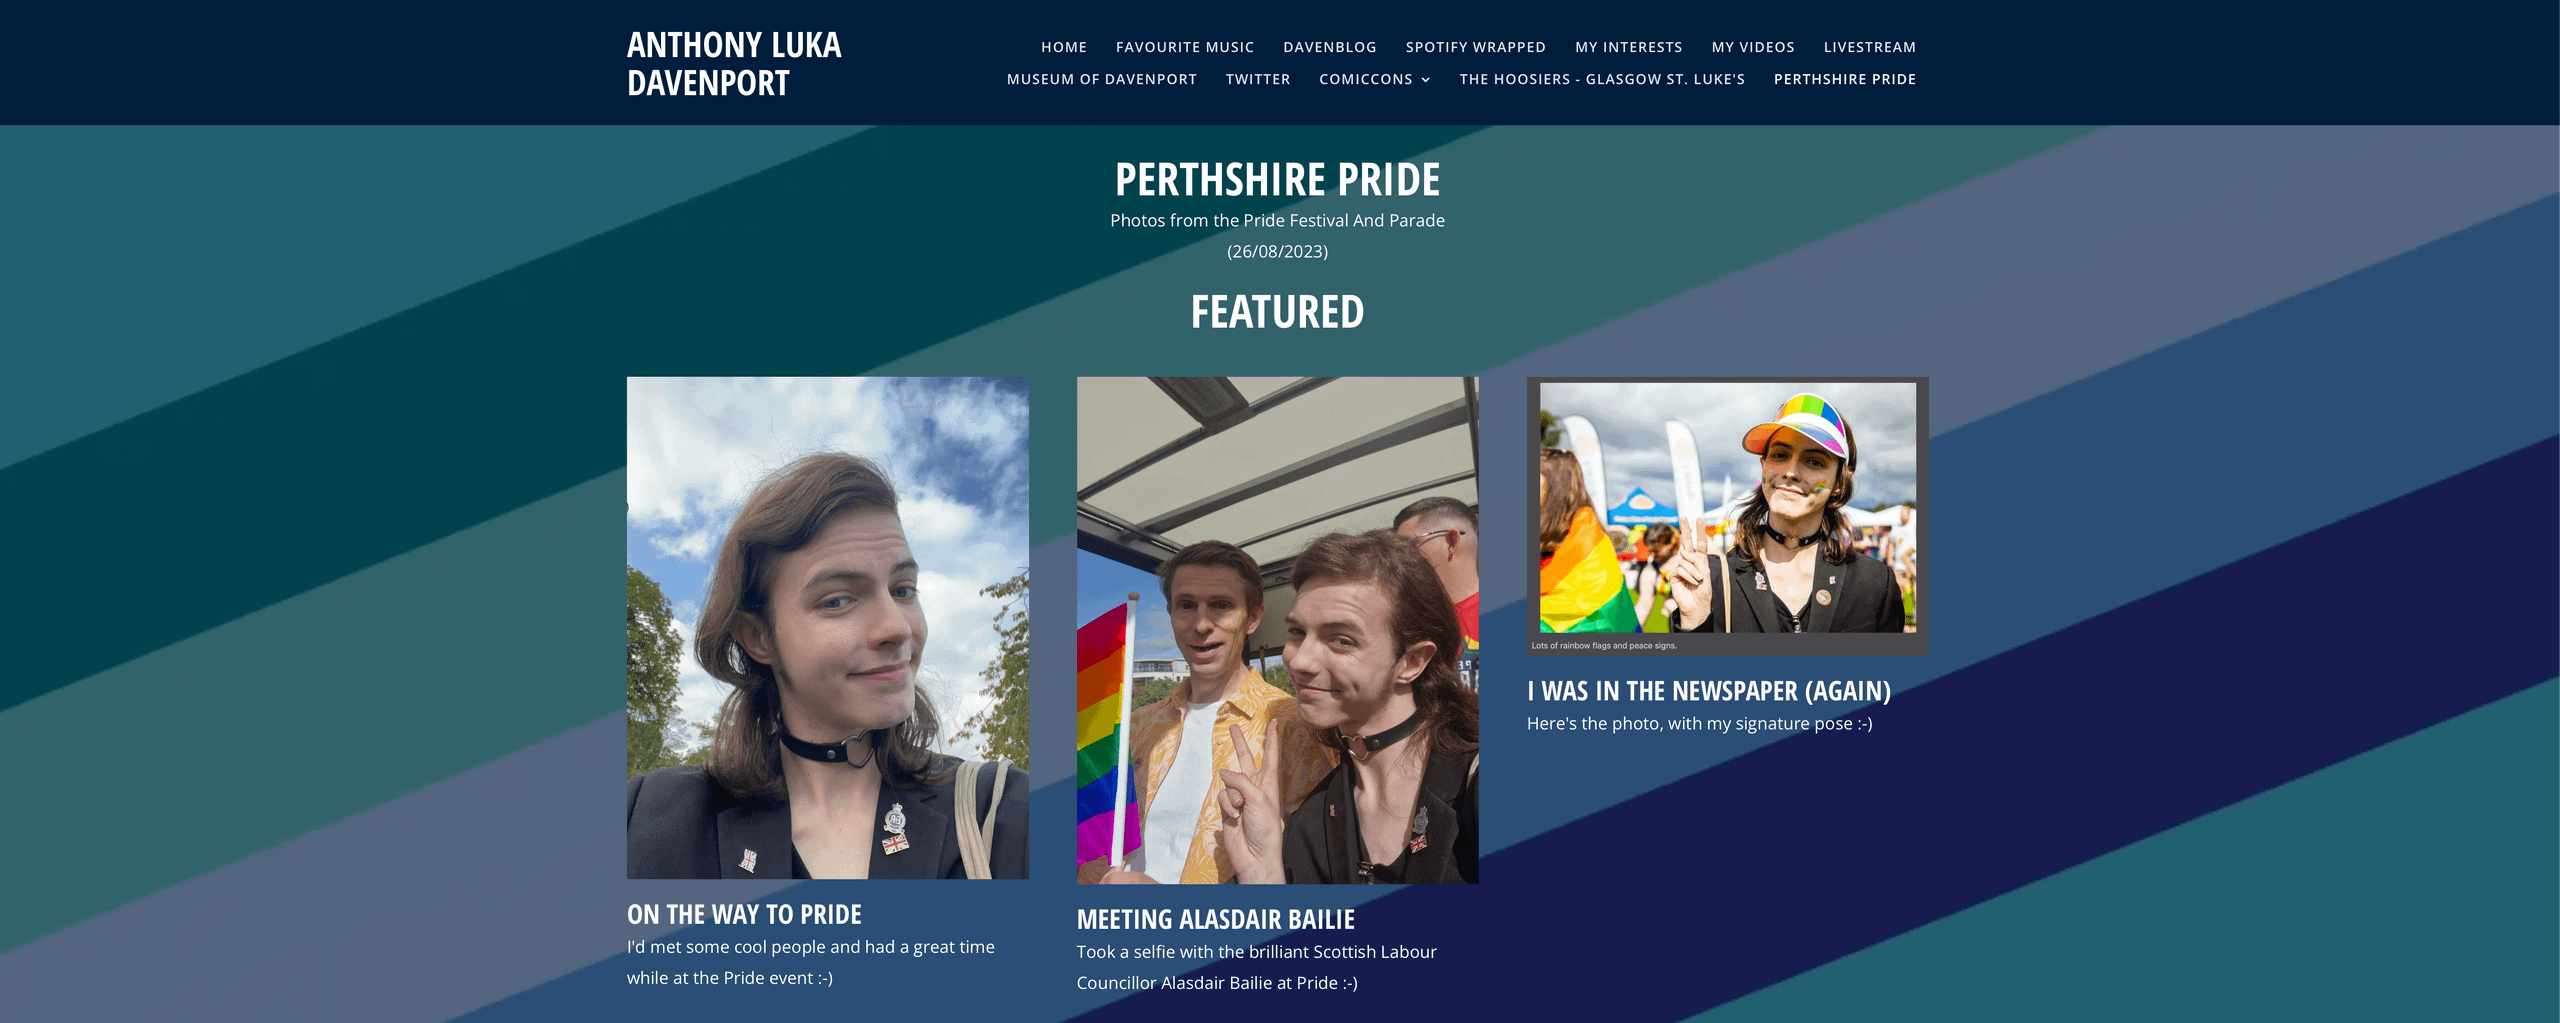 Perthshire Pride Page - Now Live